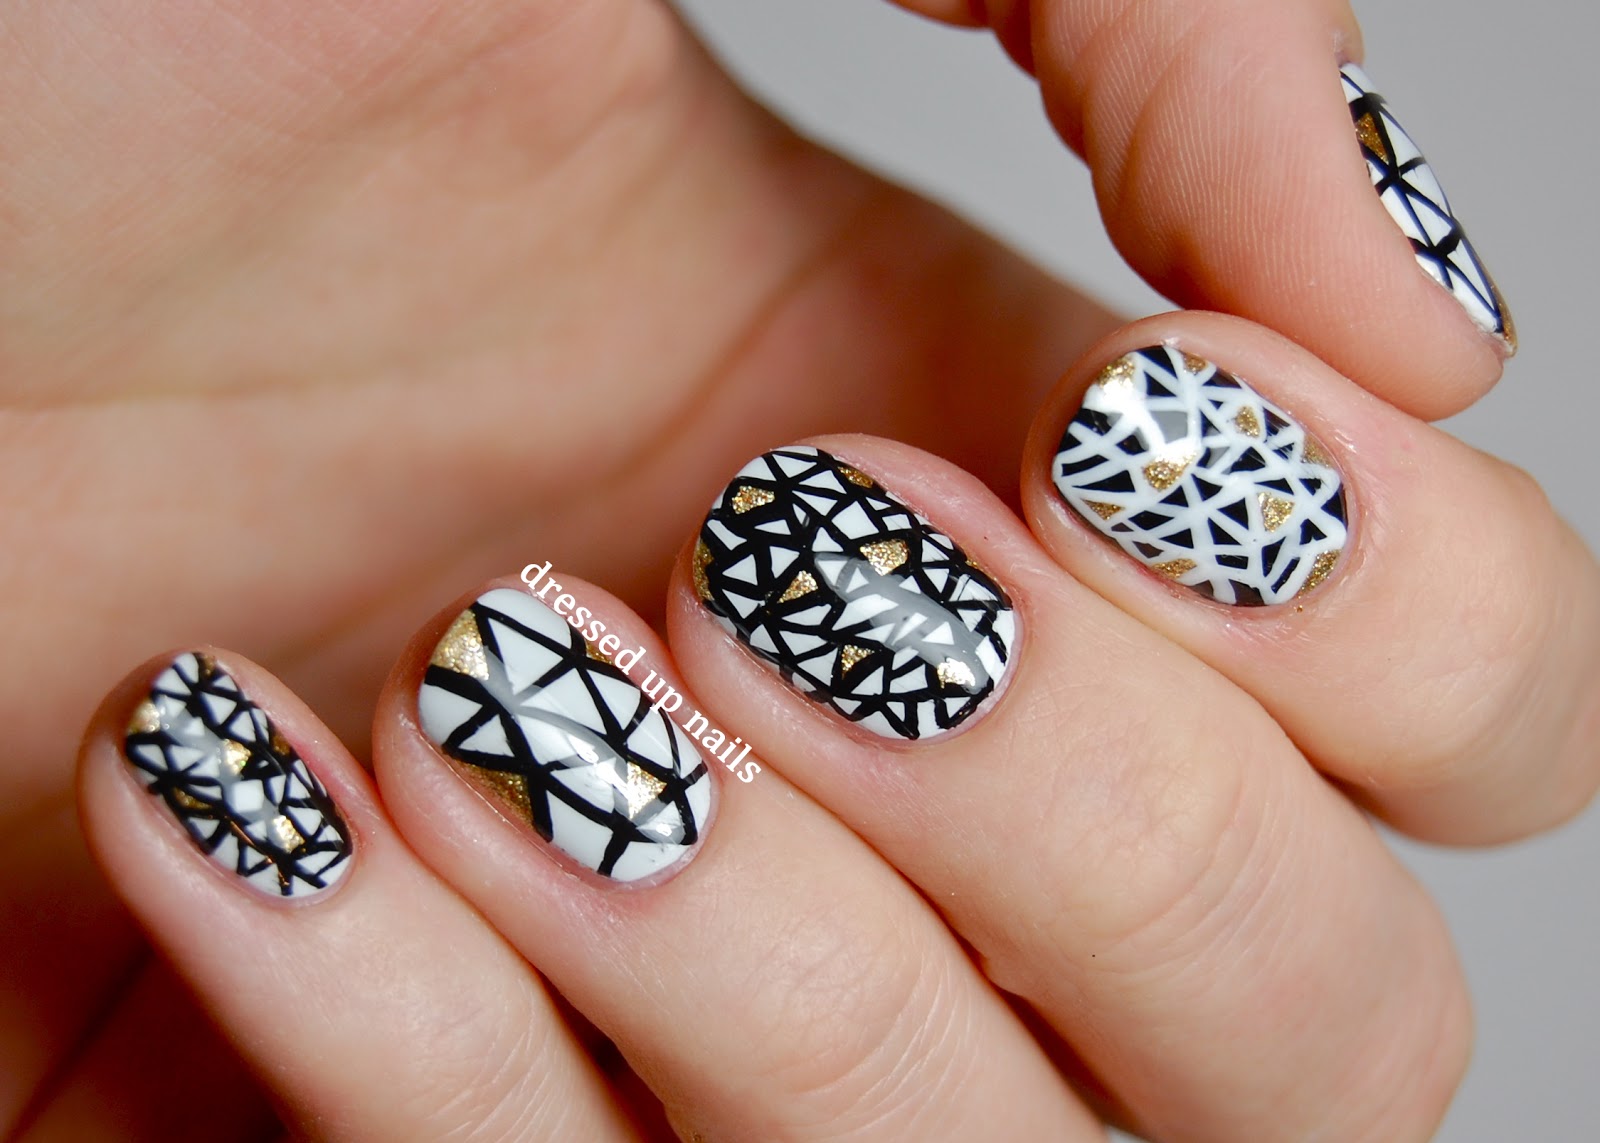 Black and White Nail Art Ideas - wide 7